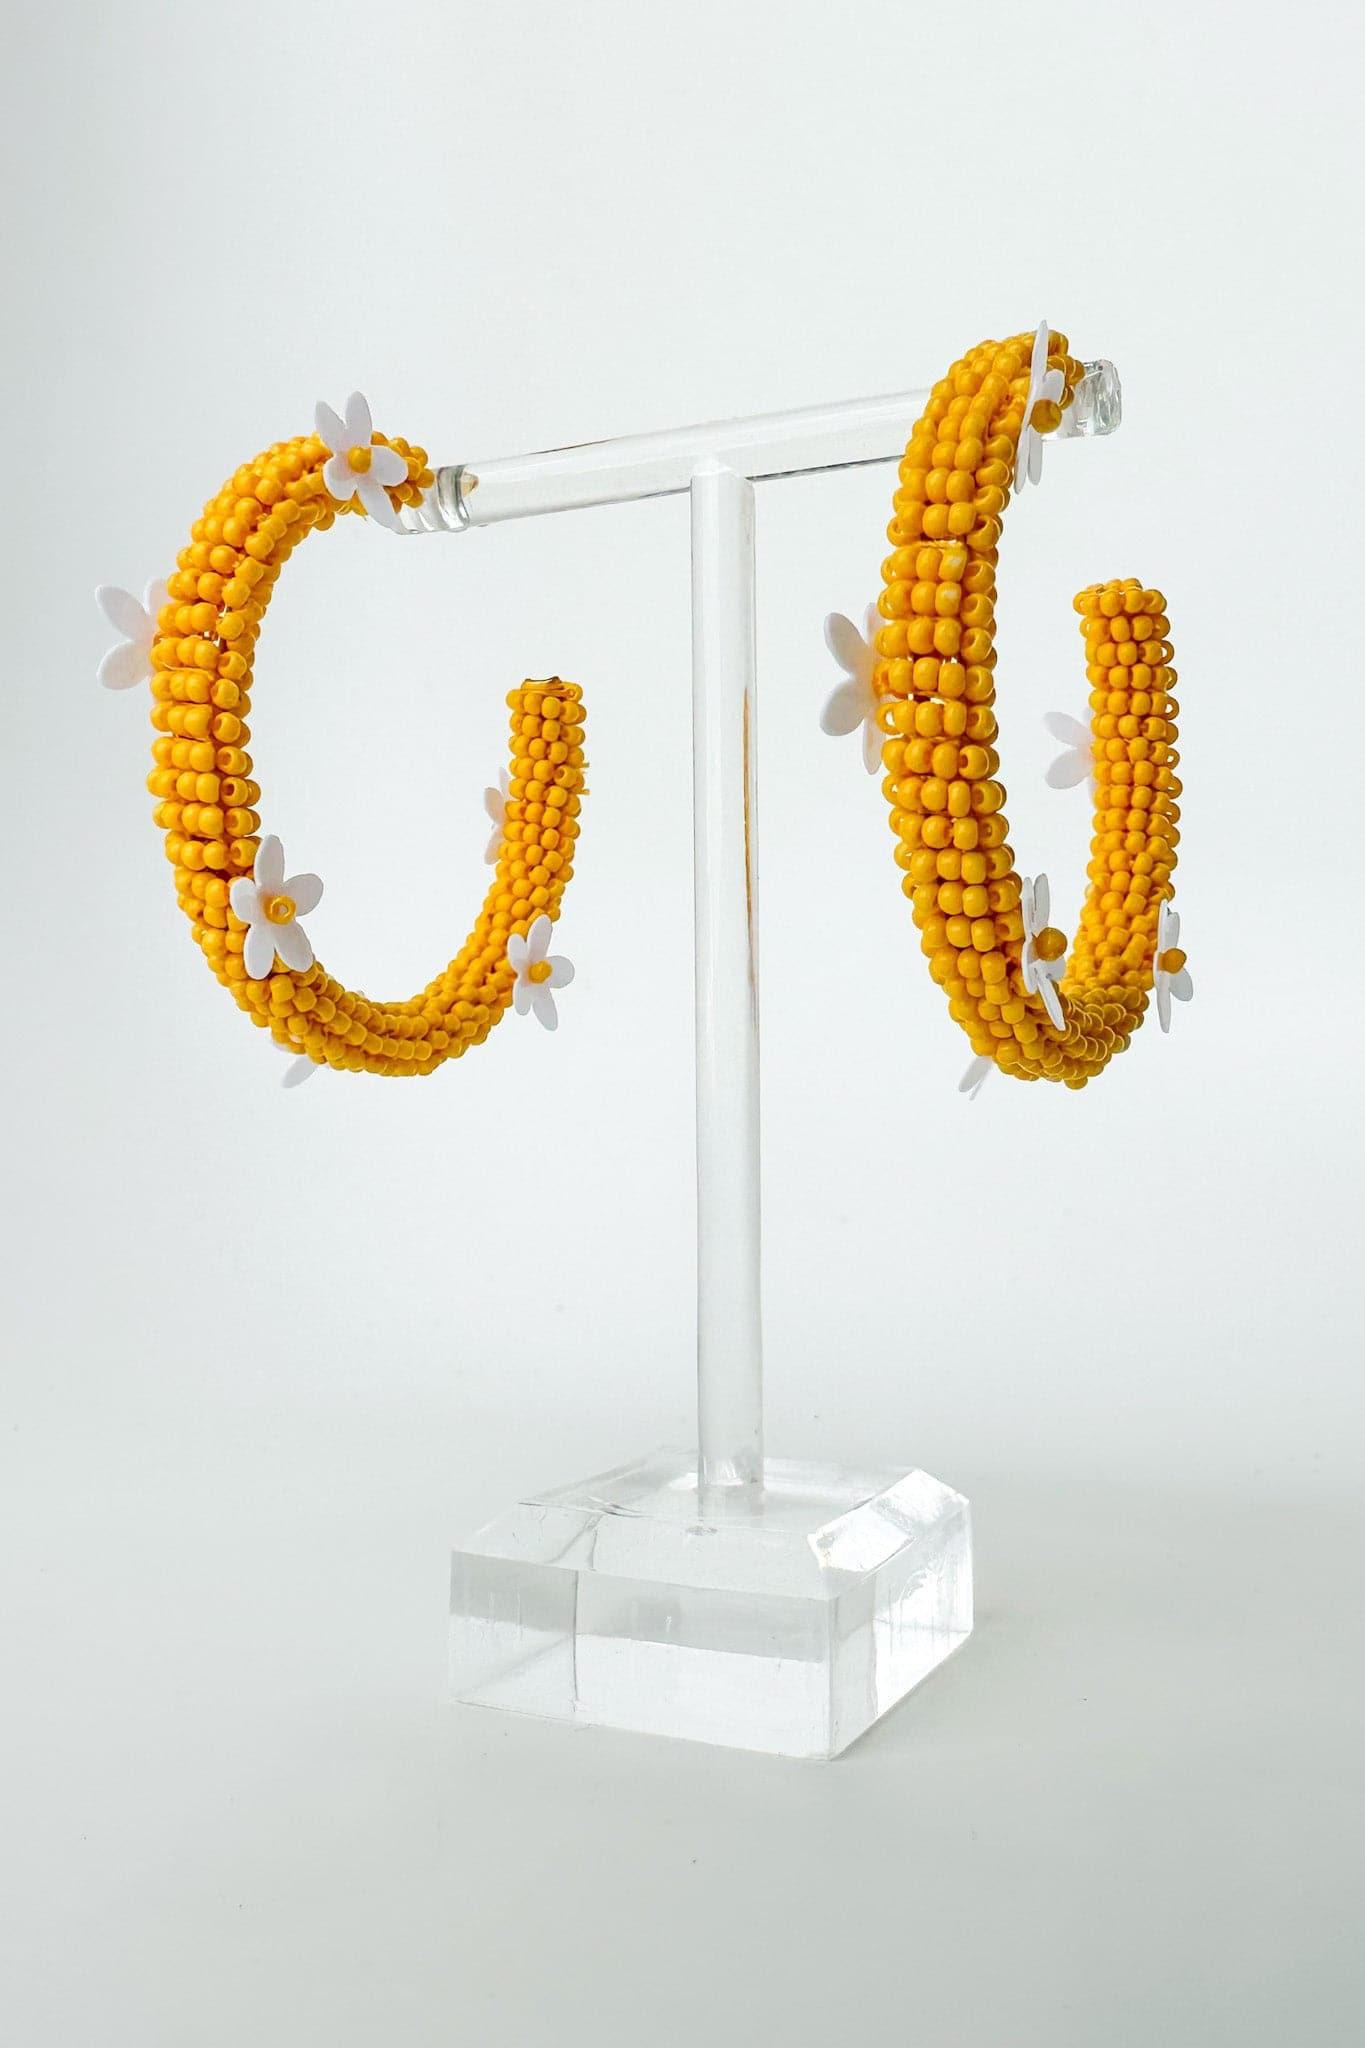 Yellow All About Sunshine Seed Bead Floral Hoop Earrings - kitchencabinetmagic